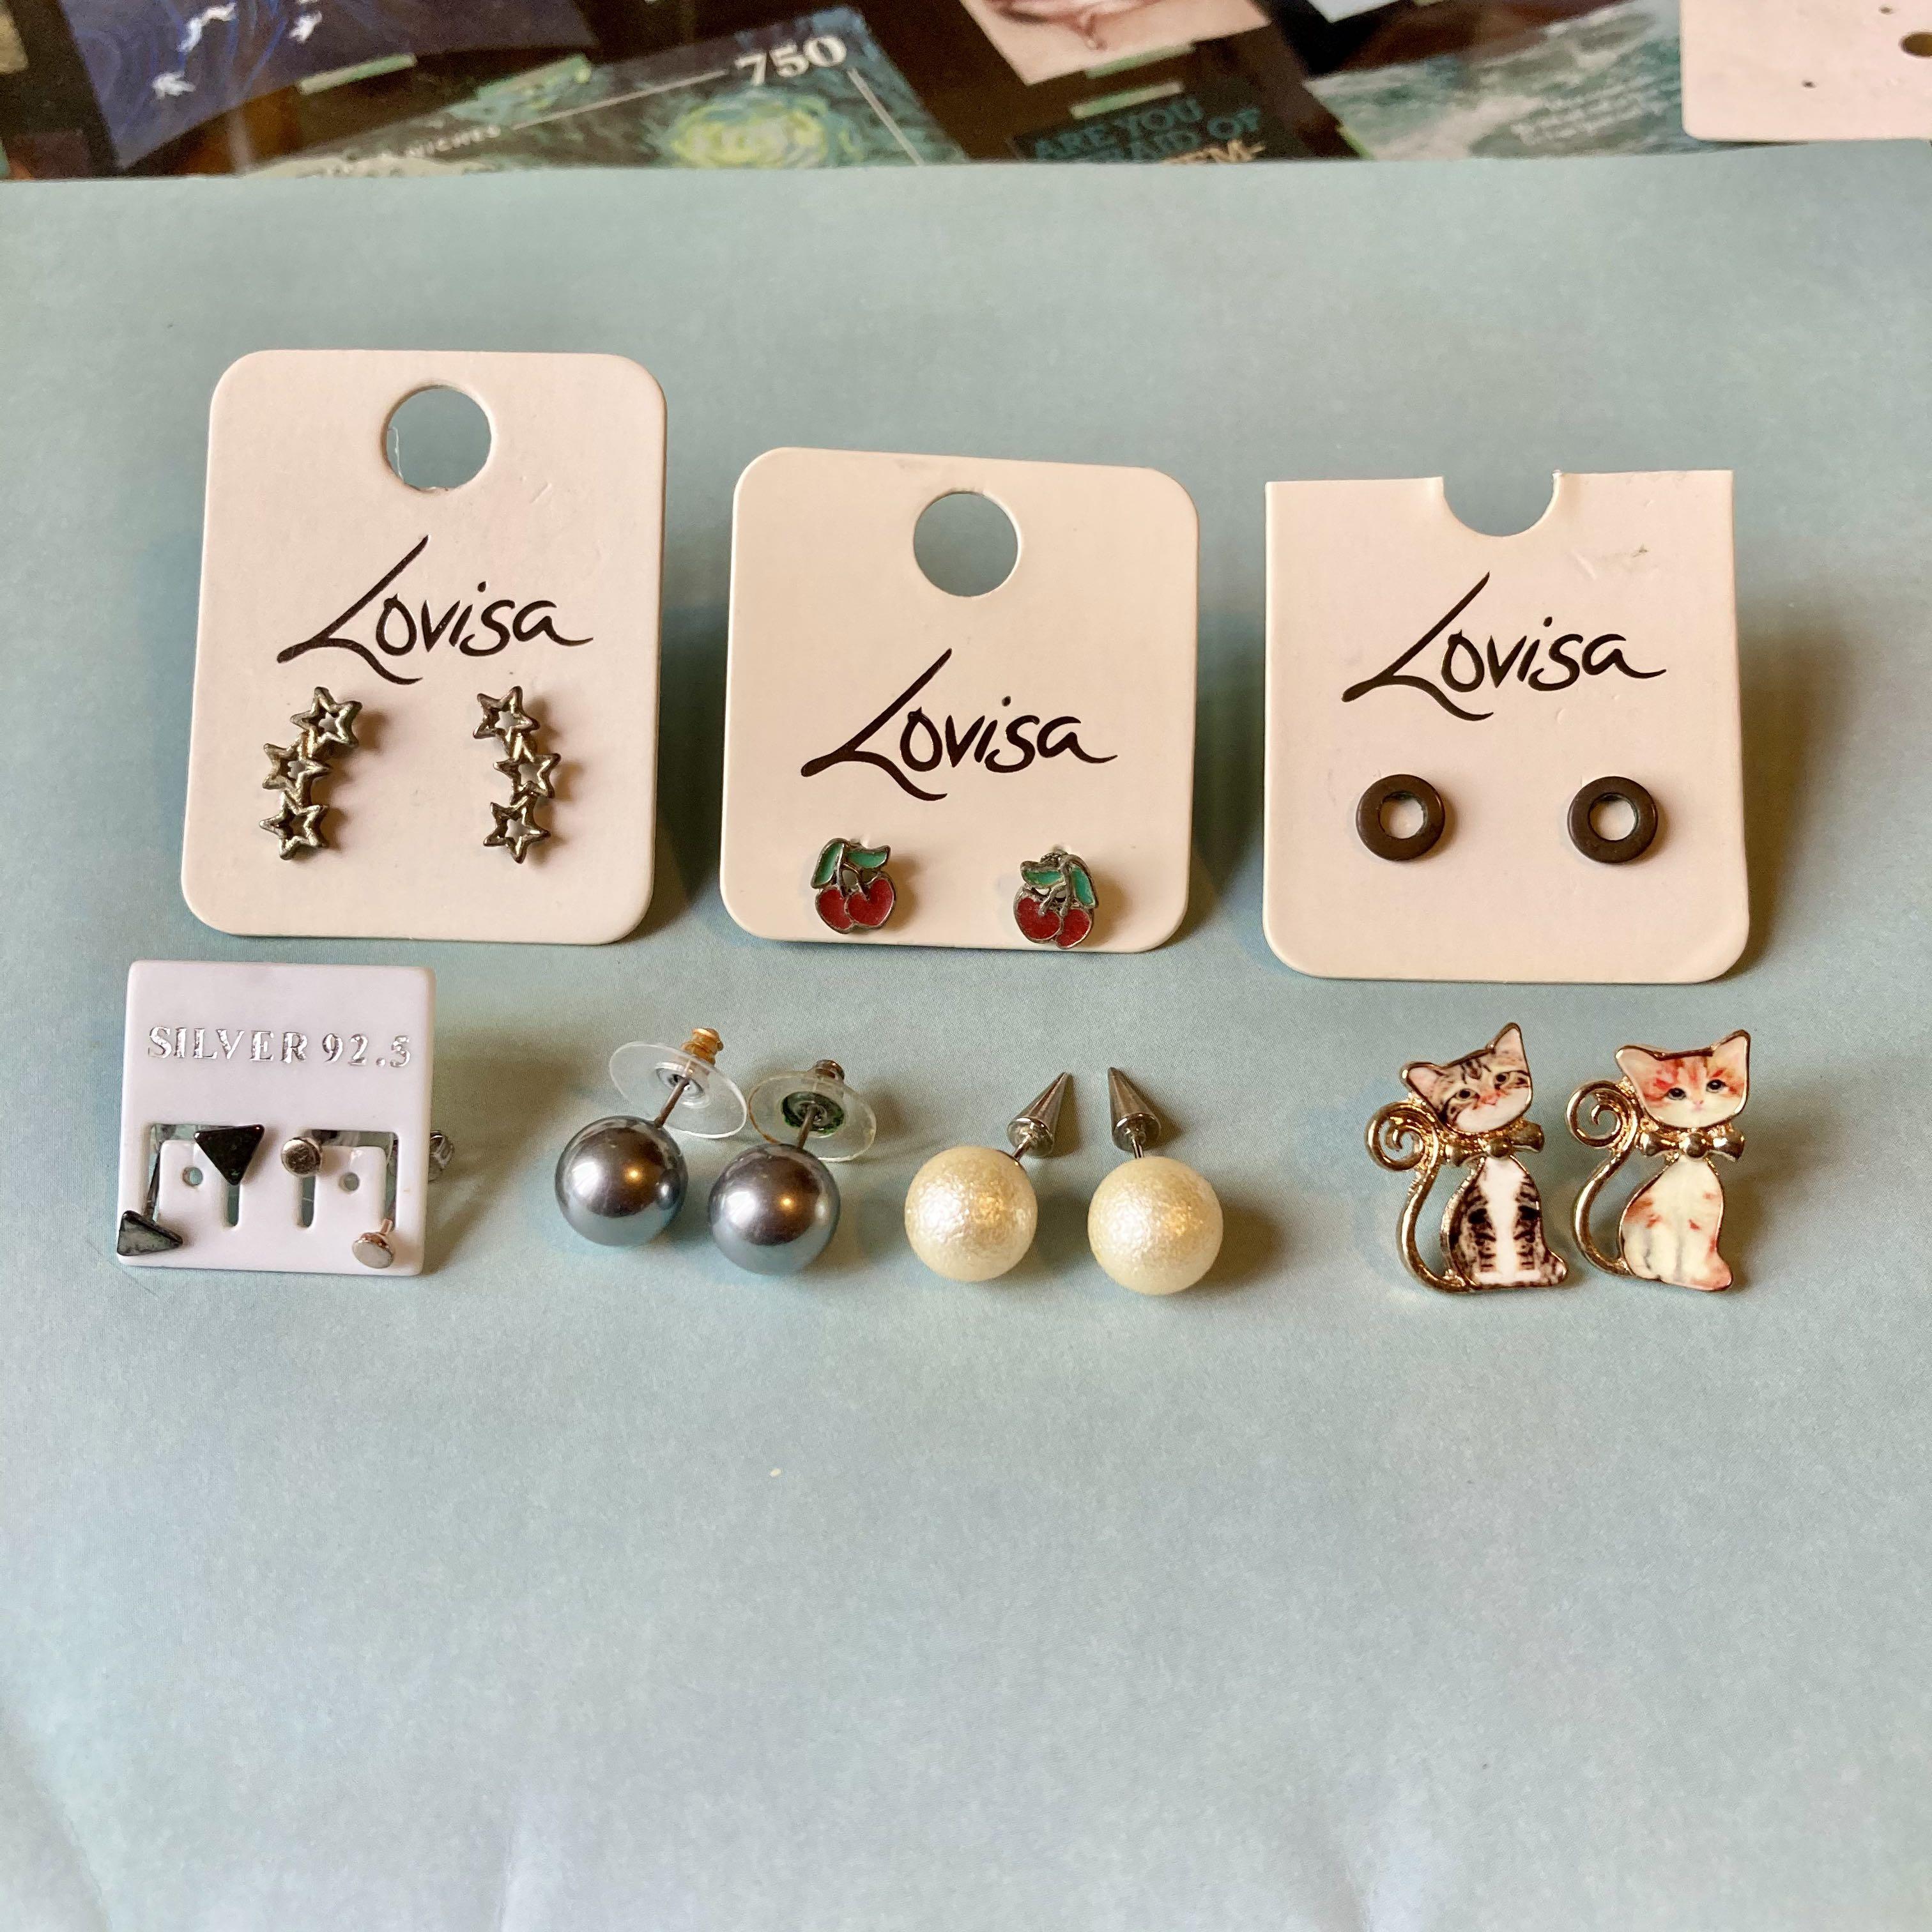 Lovisa - GIRL WITH A PEARL. Give your classic pearl earring a fashion fix  by adding gold accents. ​www.lovisa.com.au/collections/earrings ​ ​SKU's -  51145477, 51143336, 51157821 ​ | Facebook